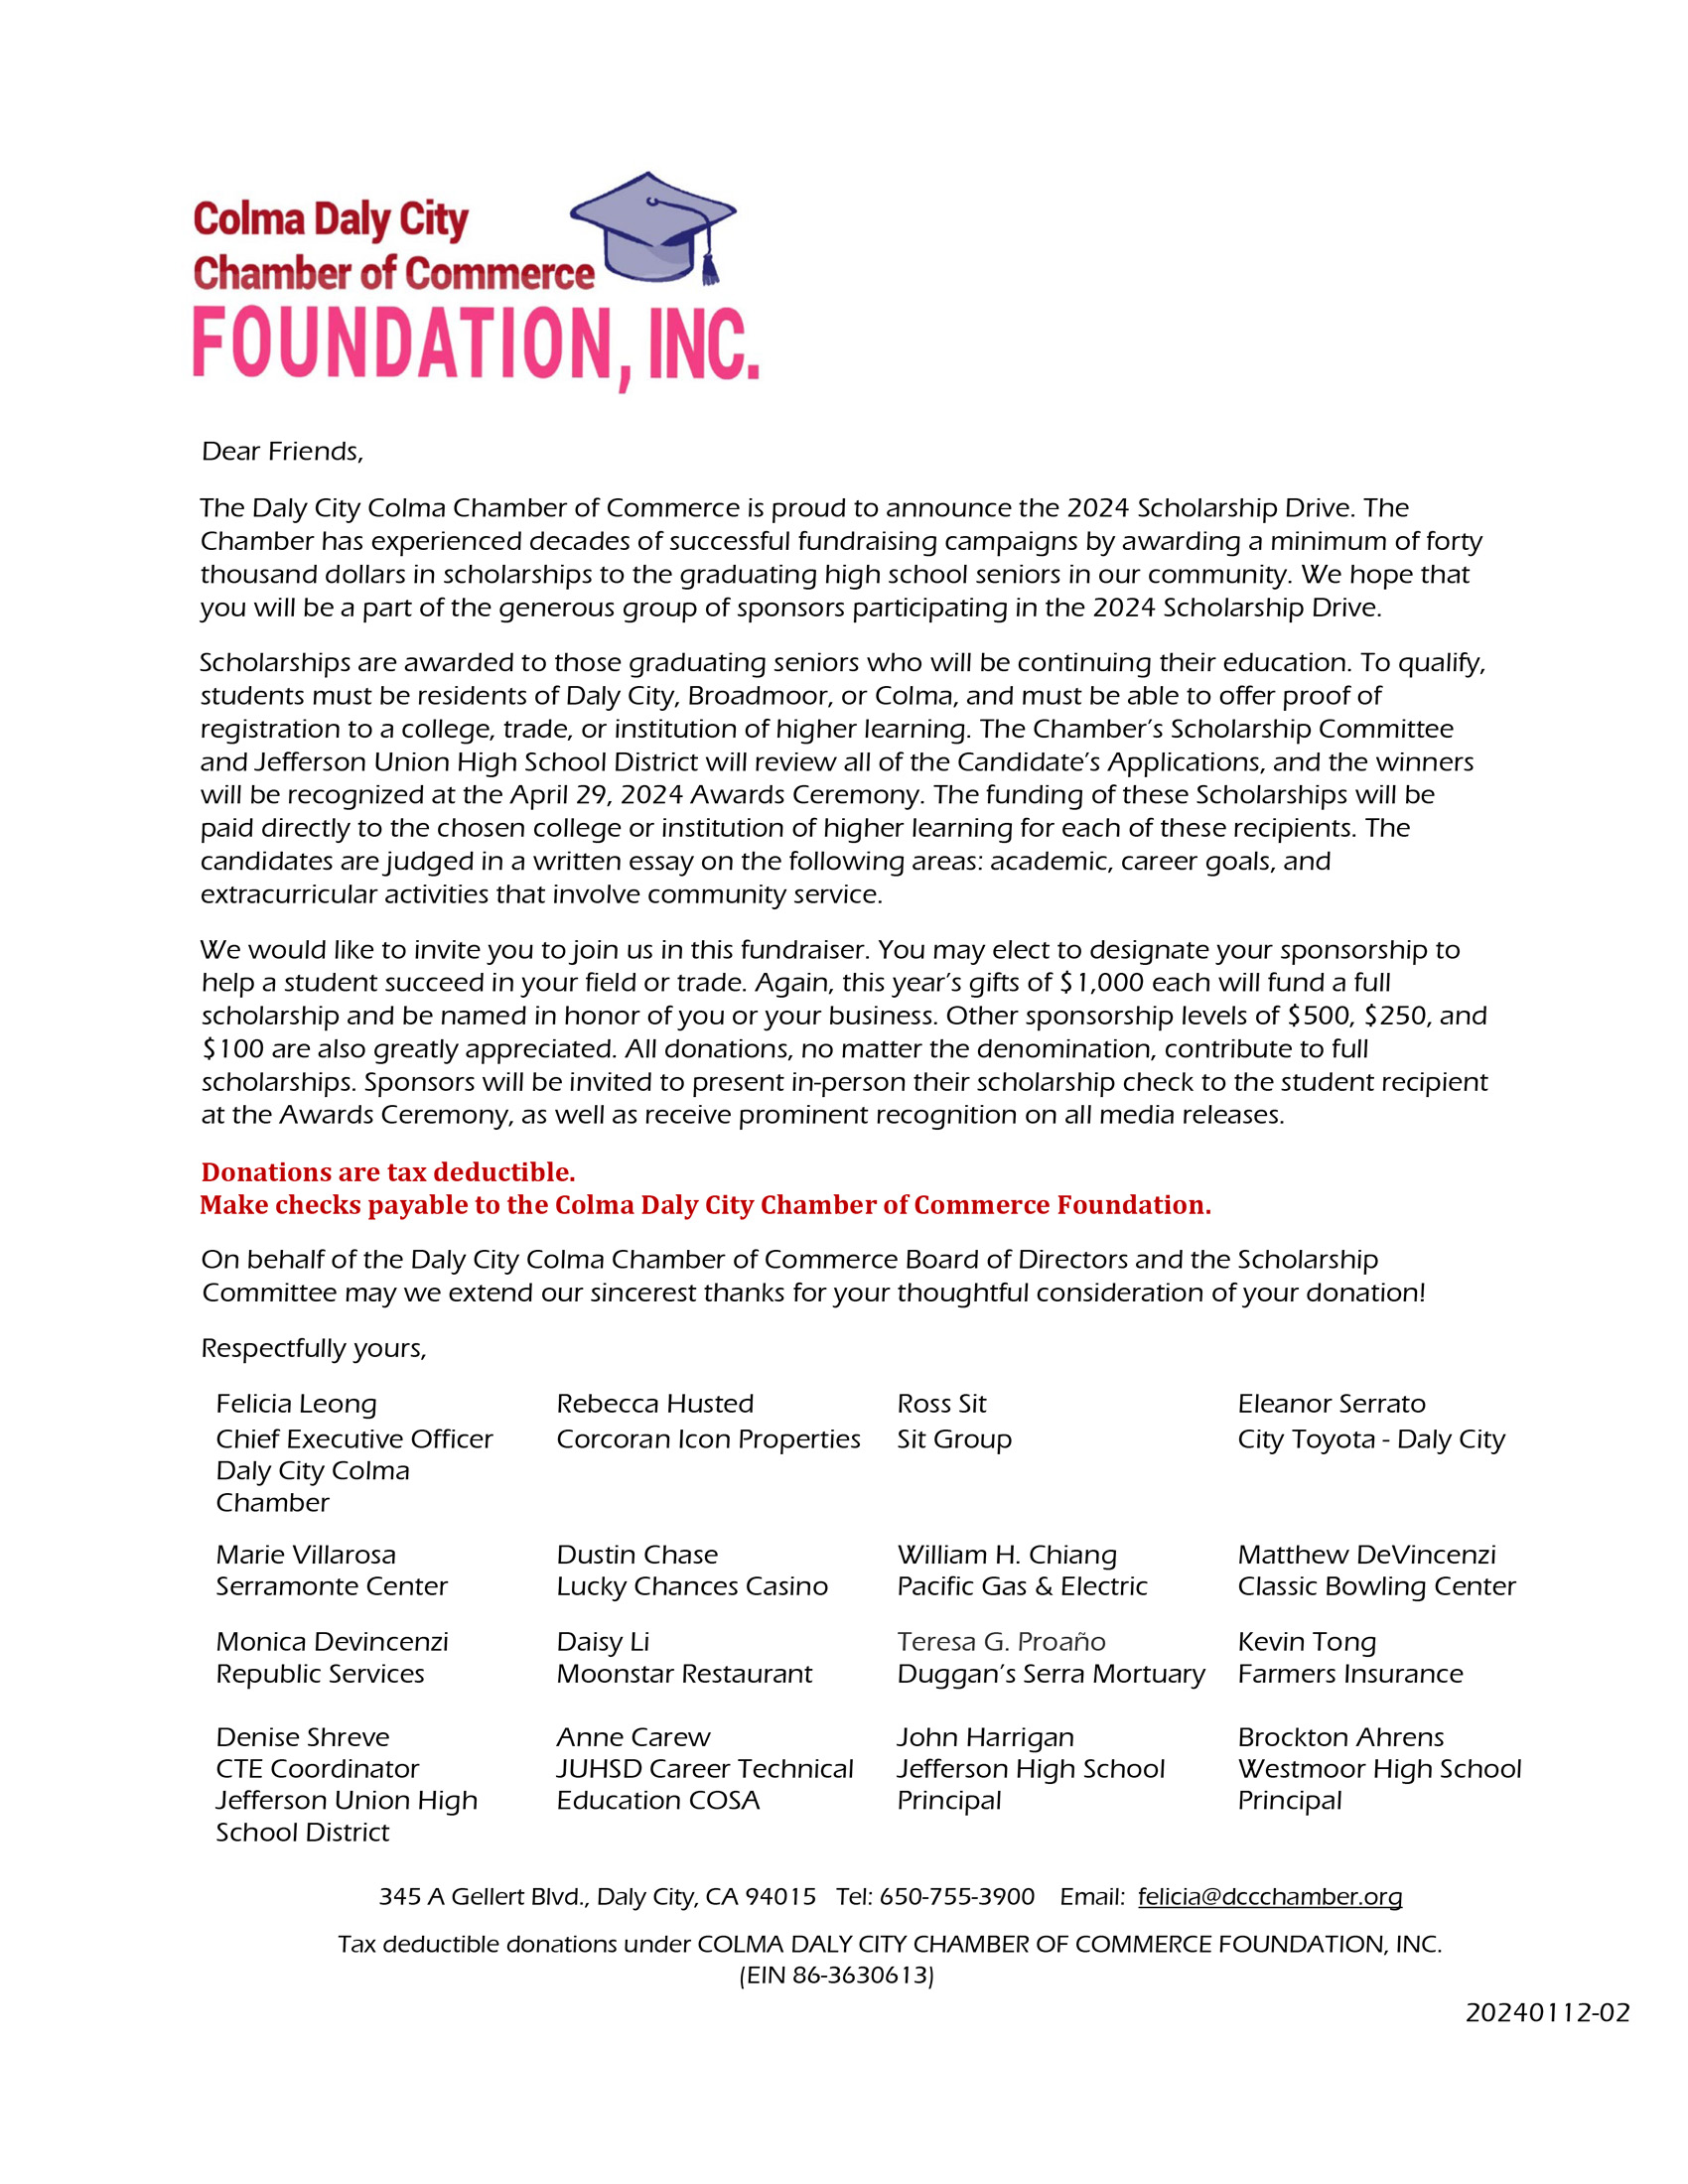 Access to Higher Education Scholarship Fund Drive 2024 donation detail letter